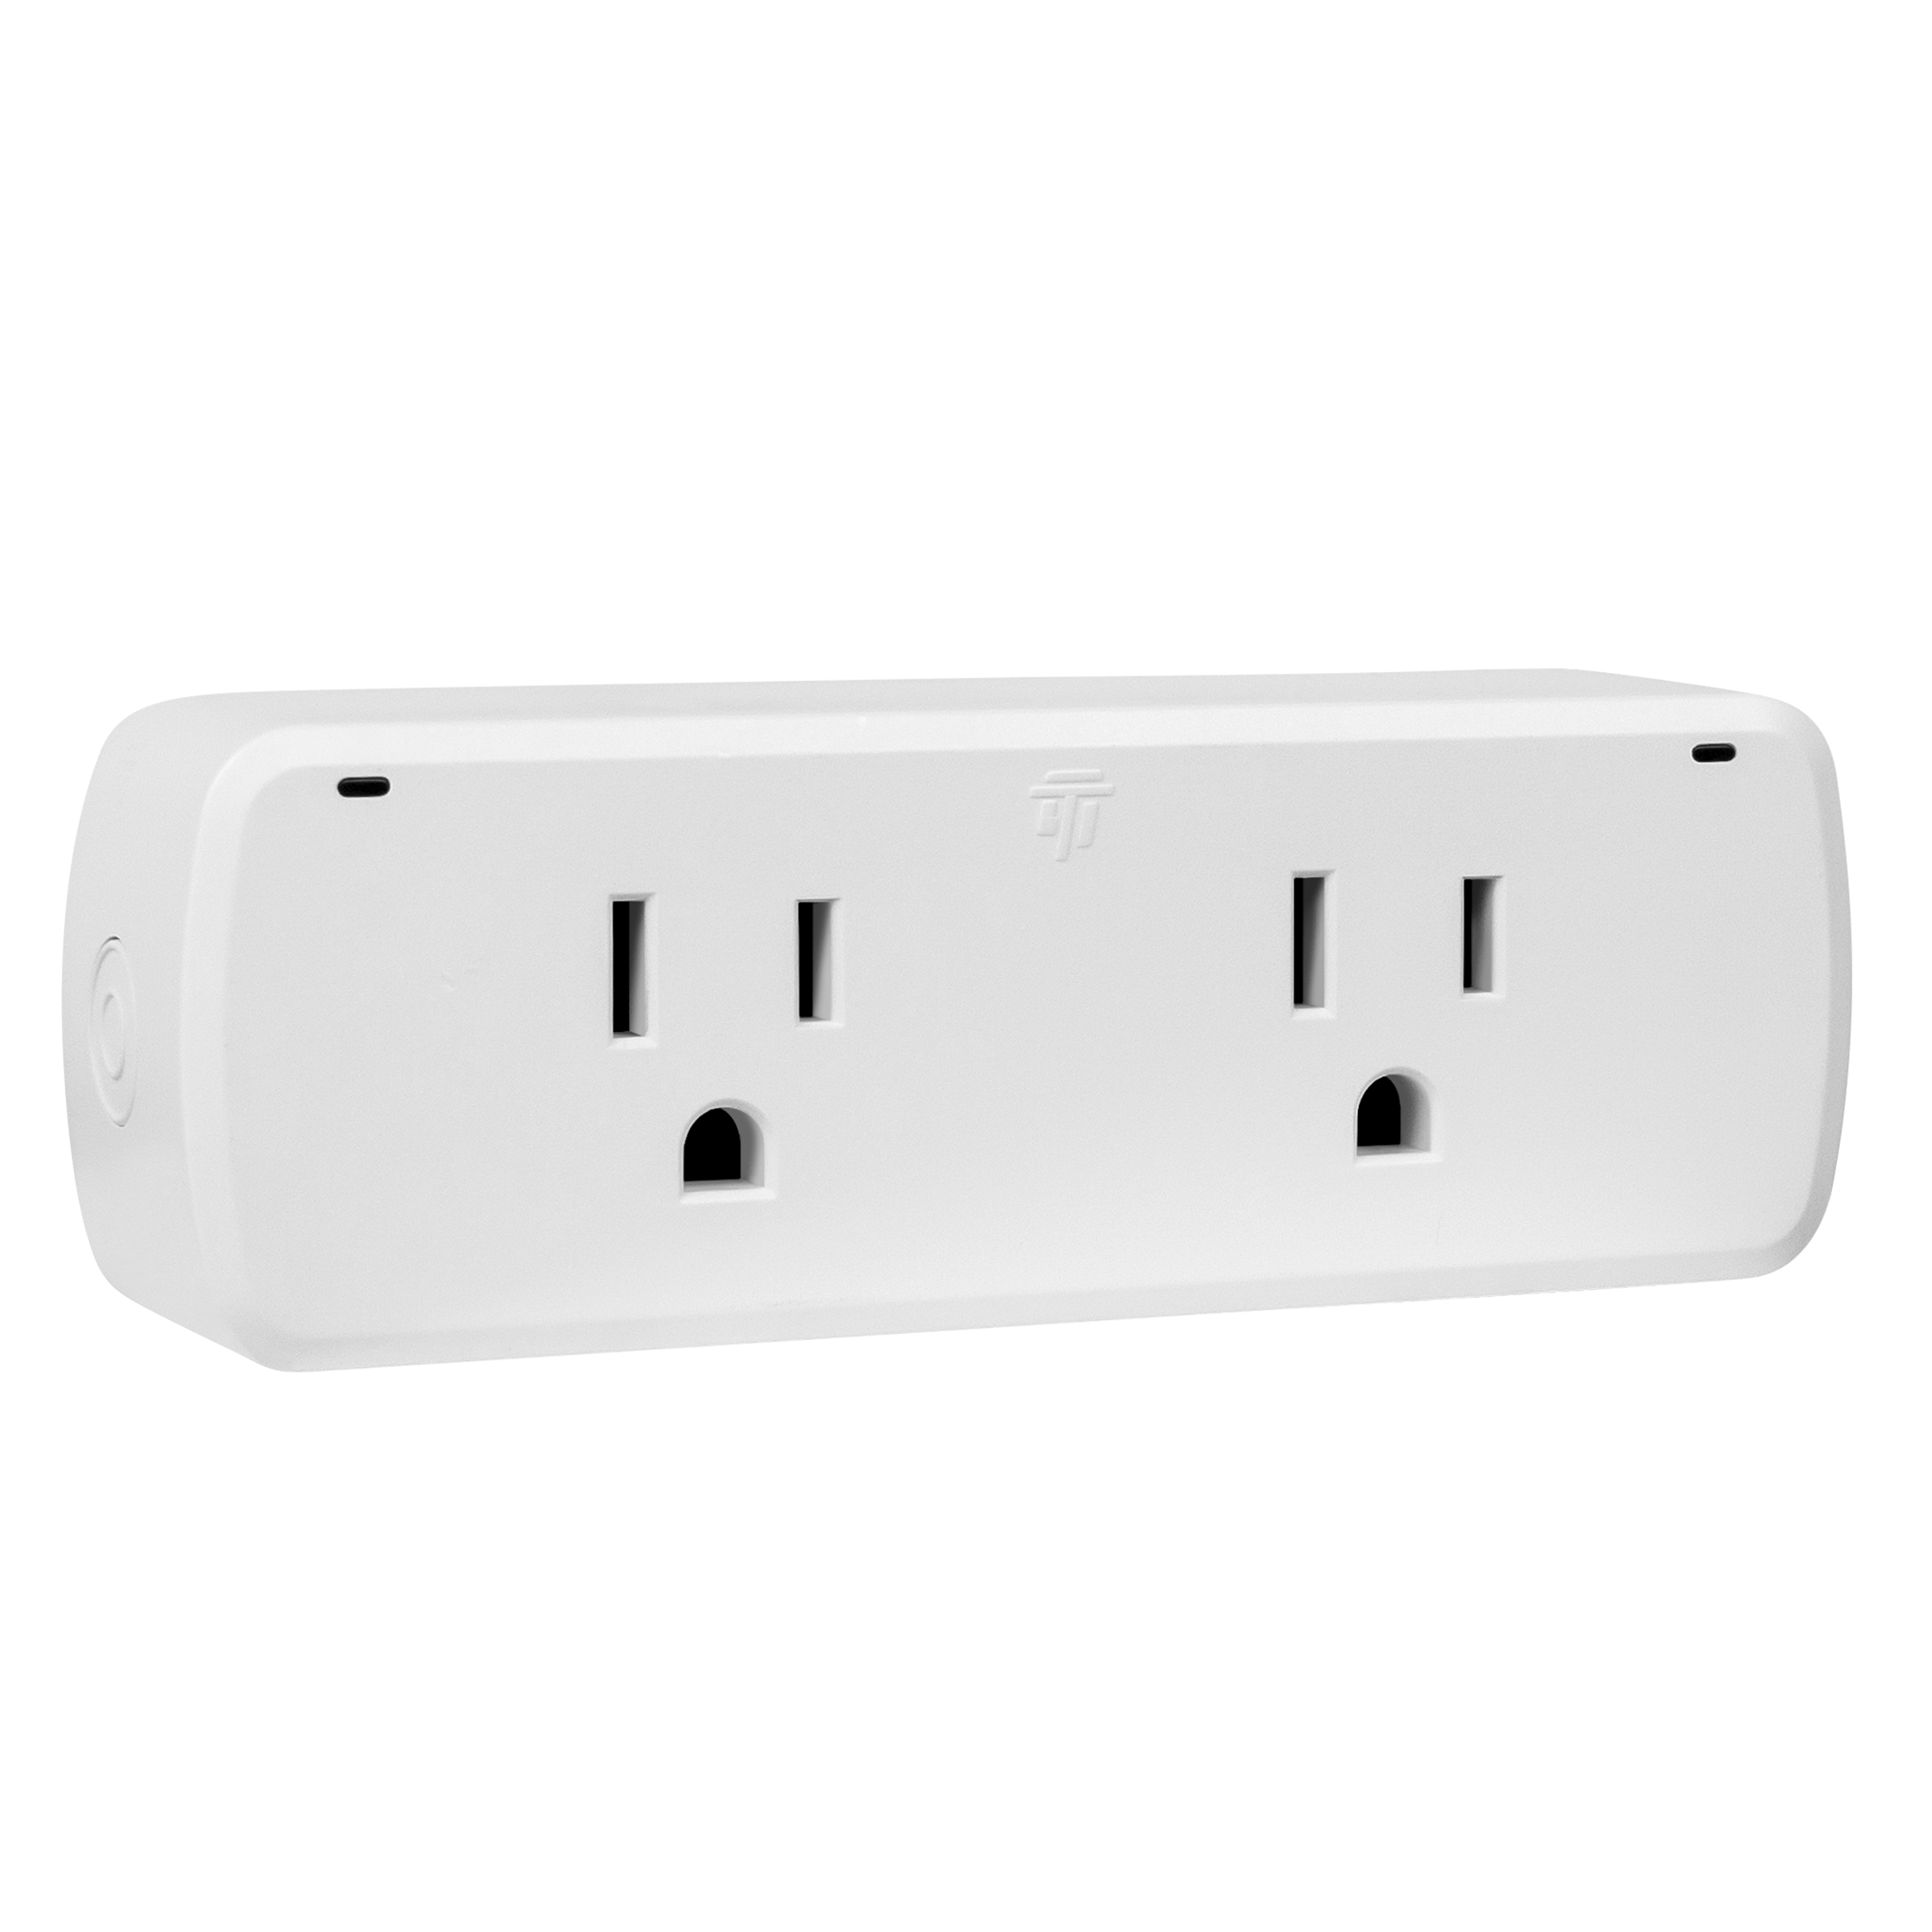 Smart Wi-Fi Plug with Energy Monitoring Dual Smart Outlets